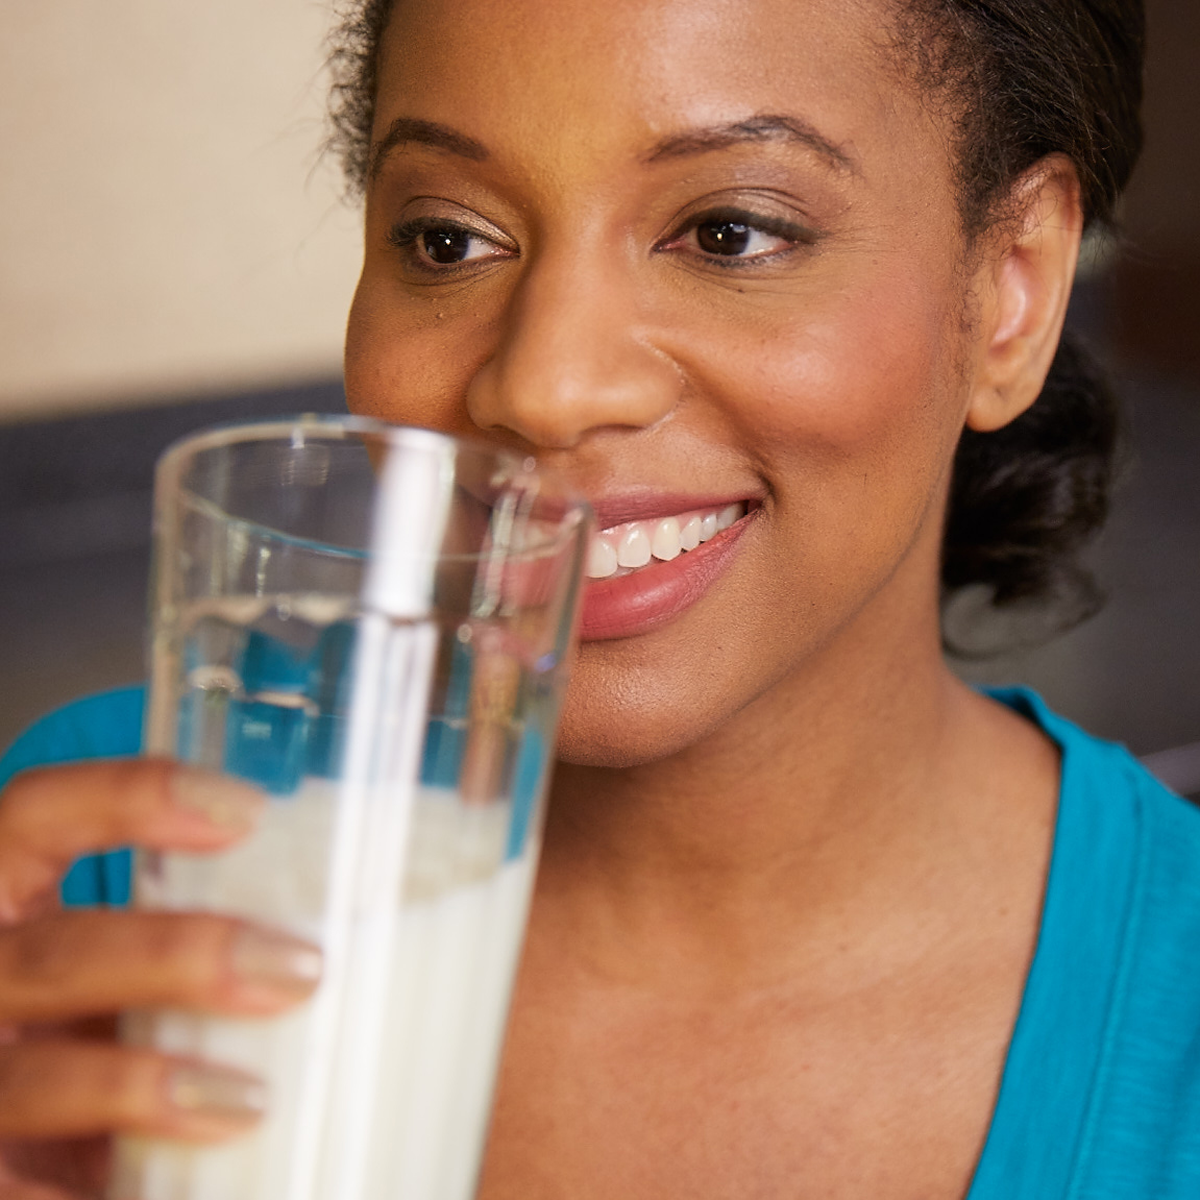 woman drinking a glass of milk and smiling